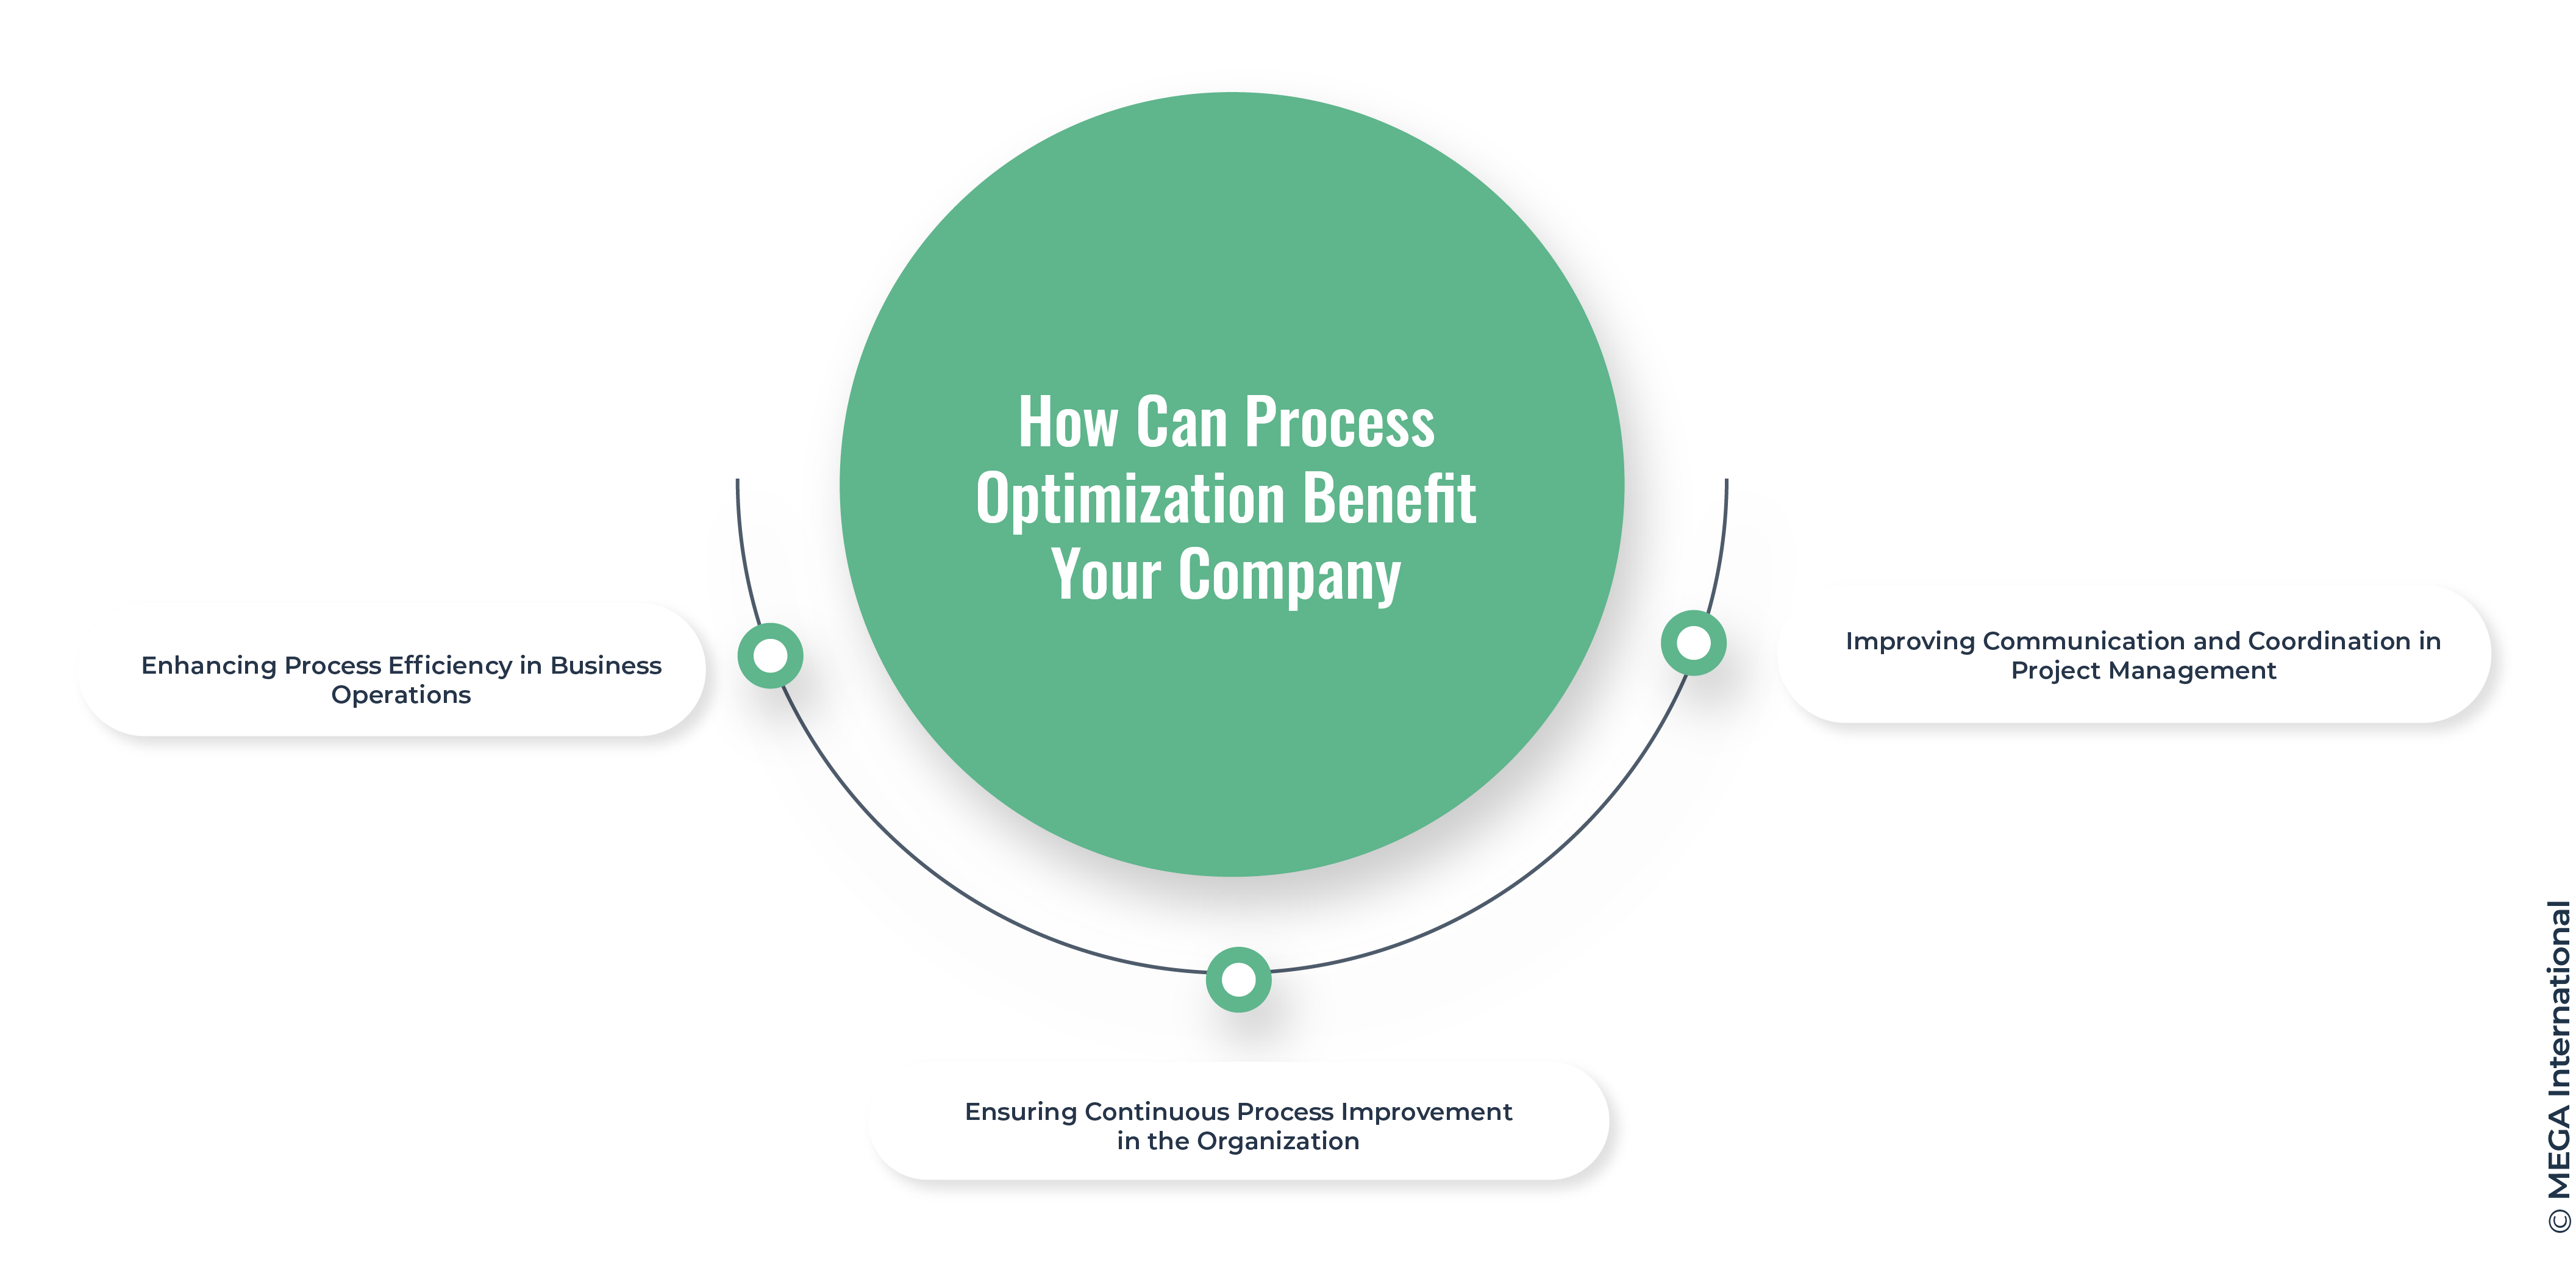 How Can Process Optimization Benefit Your Company?